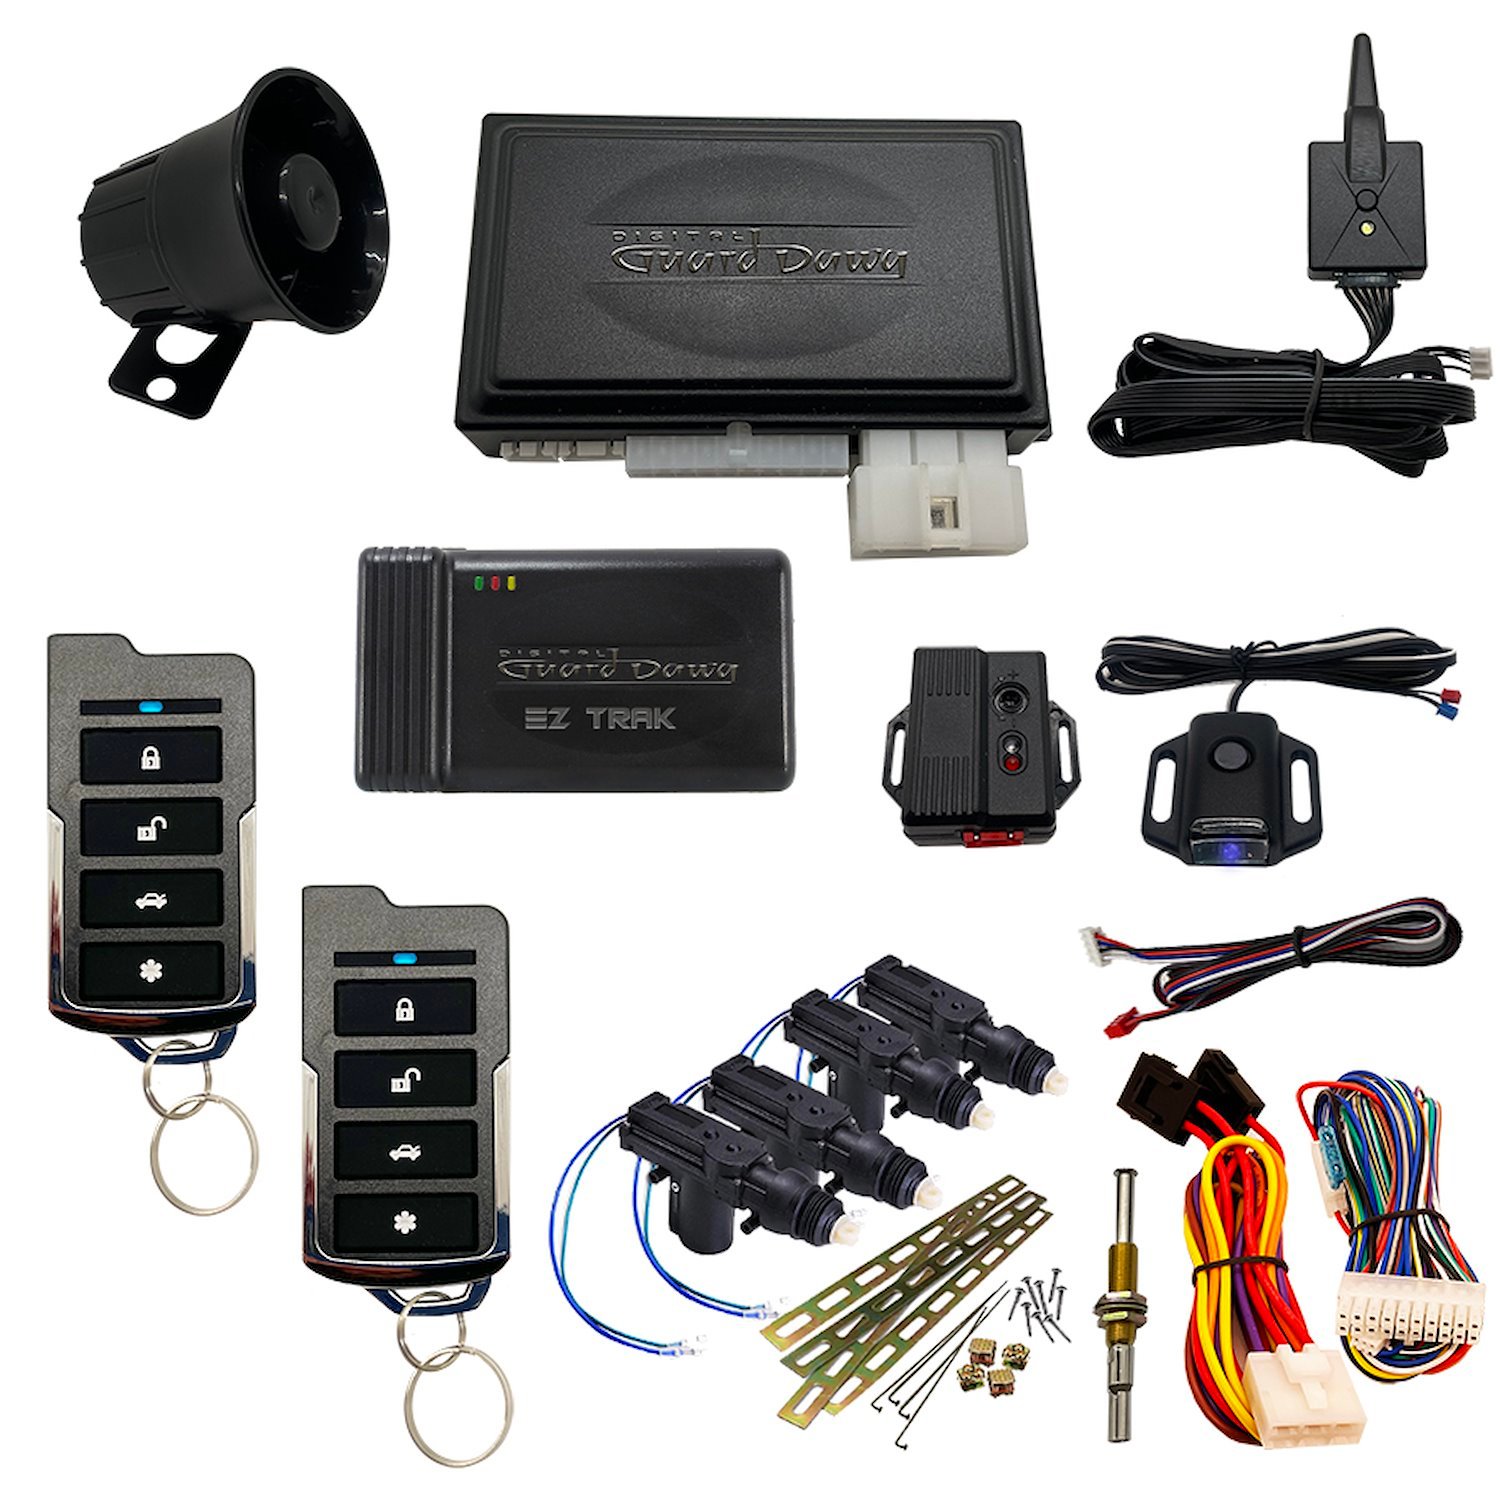 DGD-KY-ALM-RS1-4A-EZ Keyless Entry, Alarm System, and Remote Start, 1-Way, w/4-Door Actuator Kit and Smart Phone EZ-Tracking